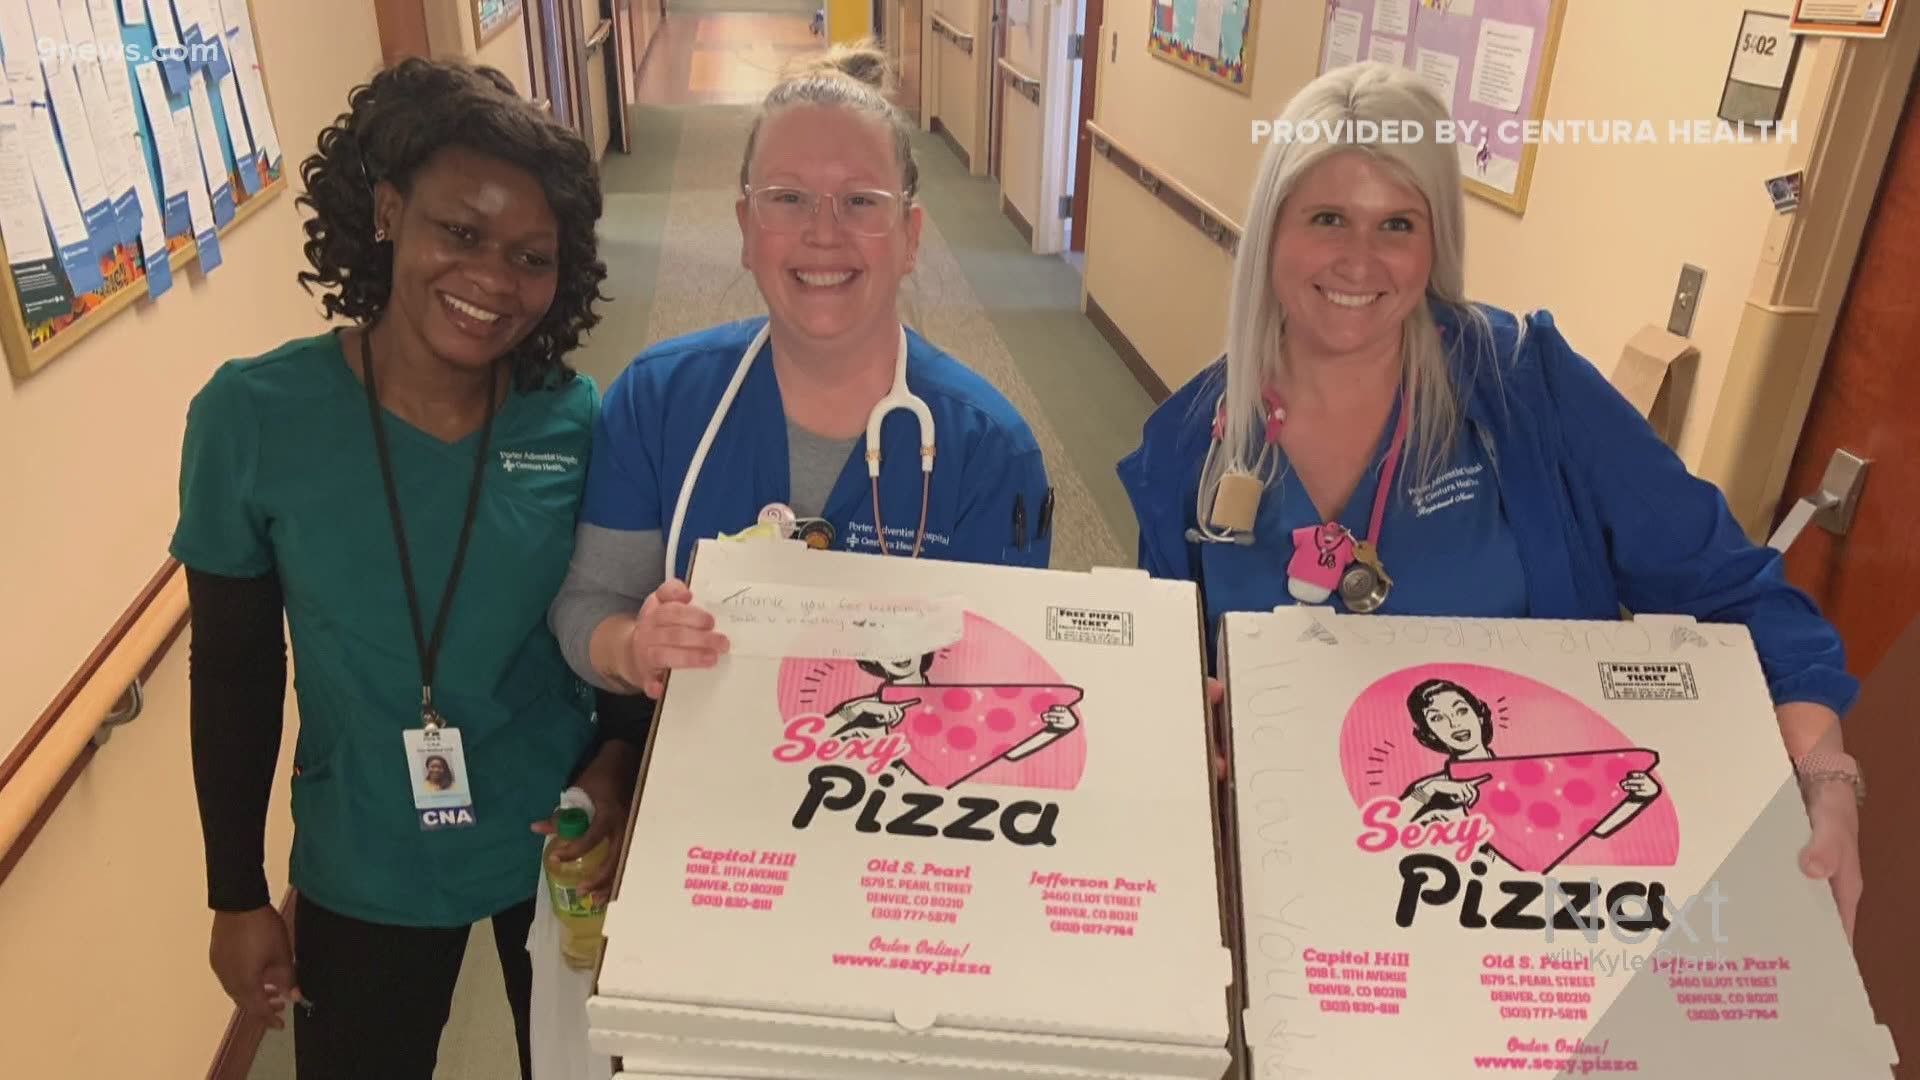 Before you just order a pizza for your local ER, here's what hospitals actually want and need.